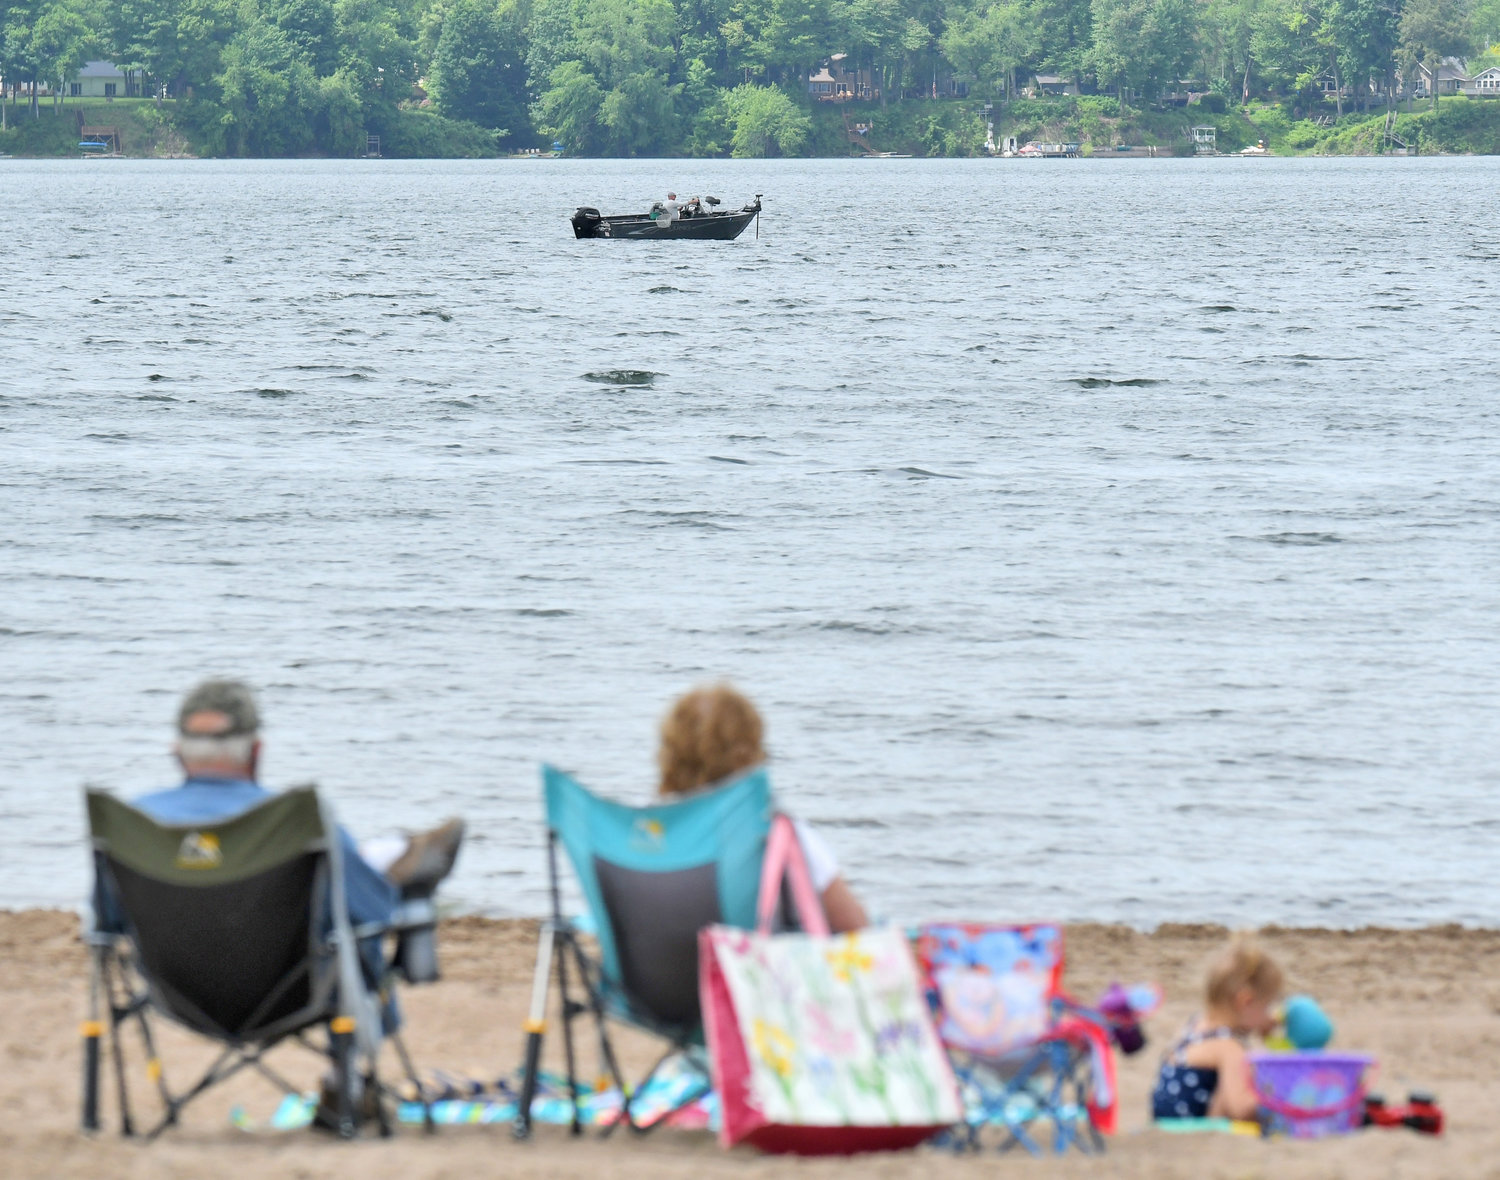 A family enjoys an idle afternoon on the beach at Delta Lake State Park in this May 2022 file photo. With its array of activities for sunbathers, boaters, fishermen and hikers, the popular state park drew 309,577 visitors in 2022, up from 281,411 visitors in 2021.